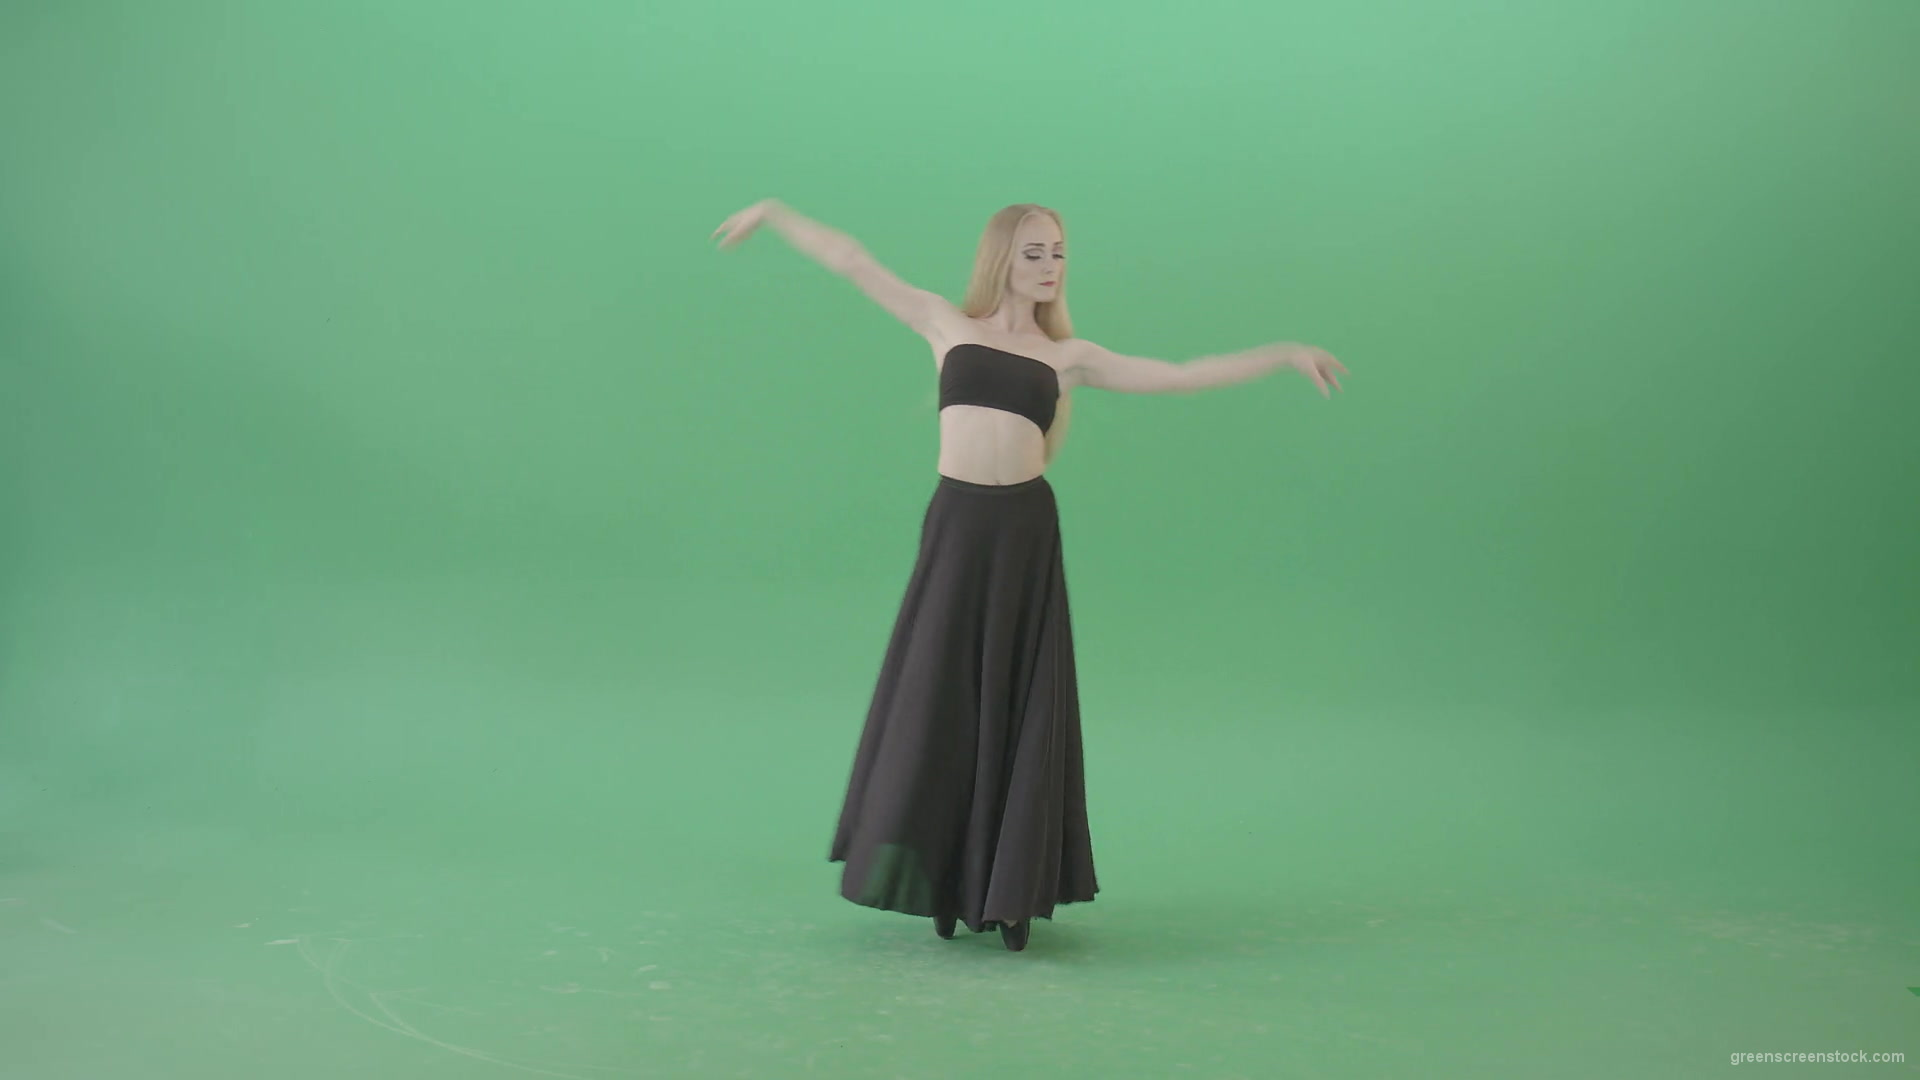 Dancing-in-the-shadow-spinning-on-the-green-screen-ballet-art-by-dancing-girl-4K-Video-Footage-1920_009 Green Screen Stock